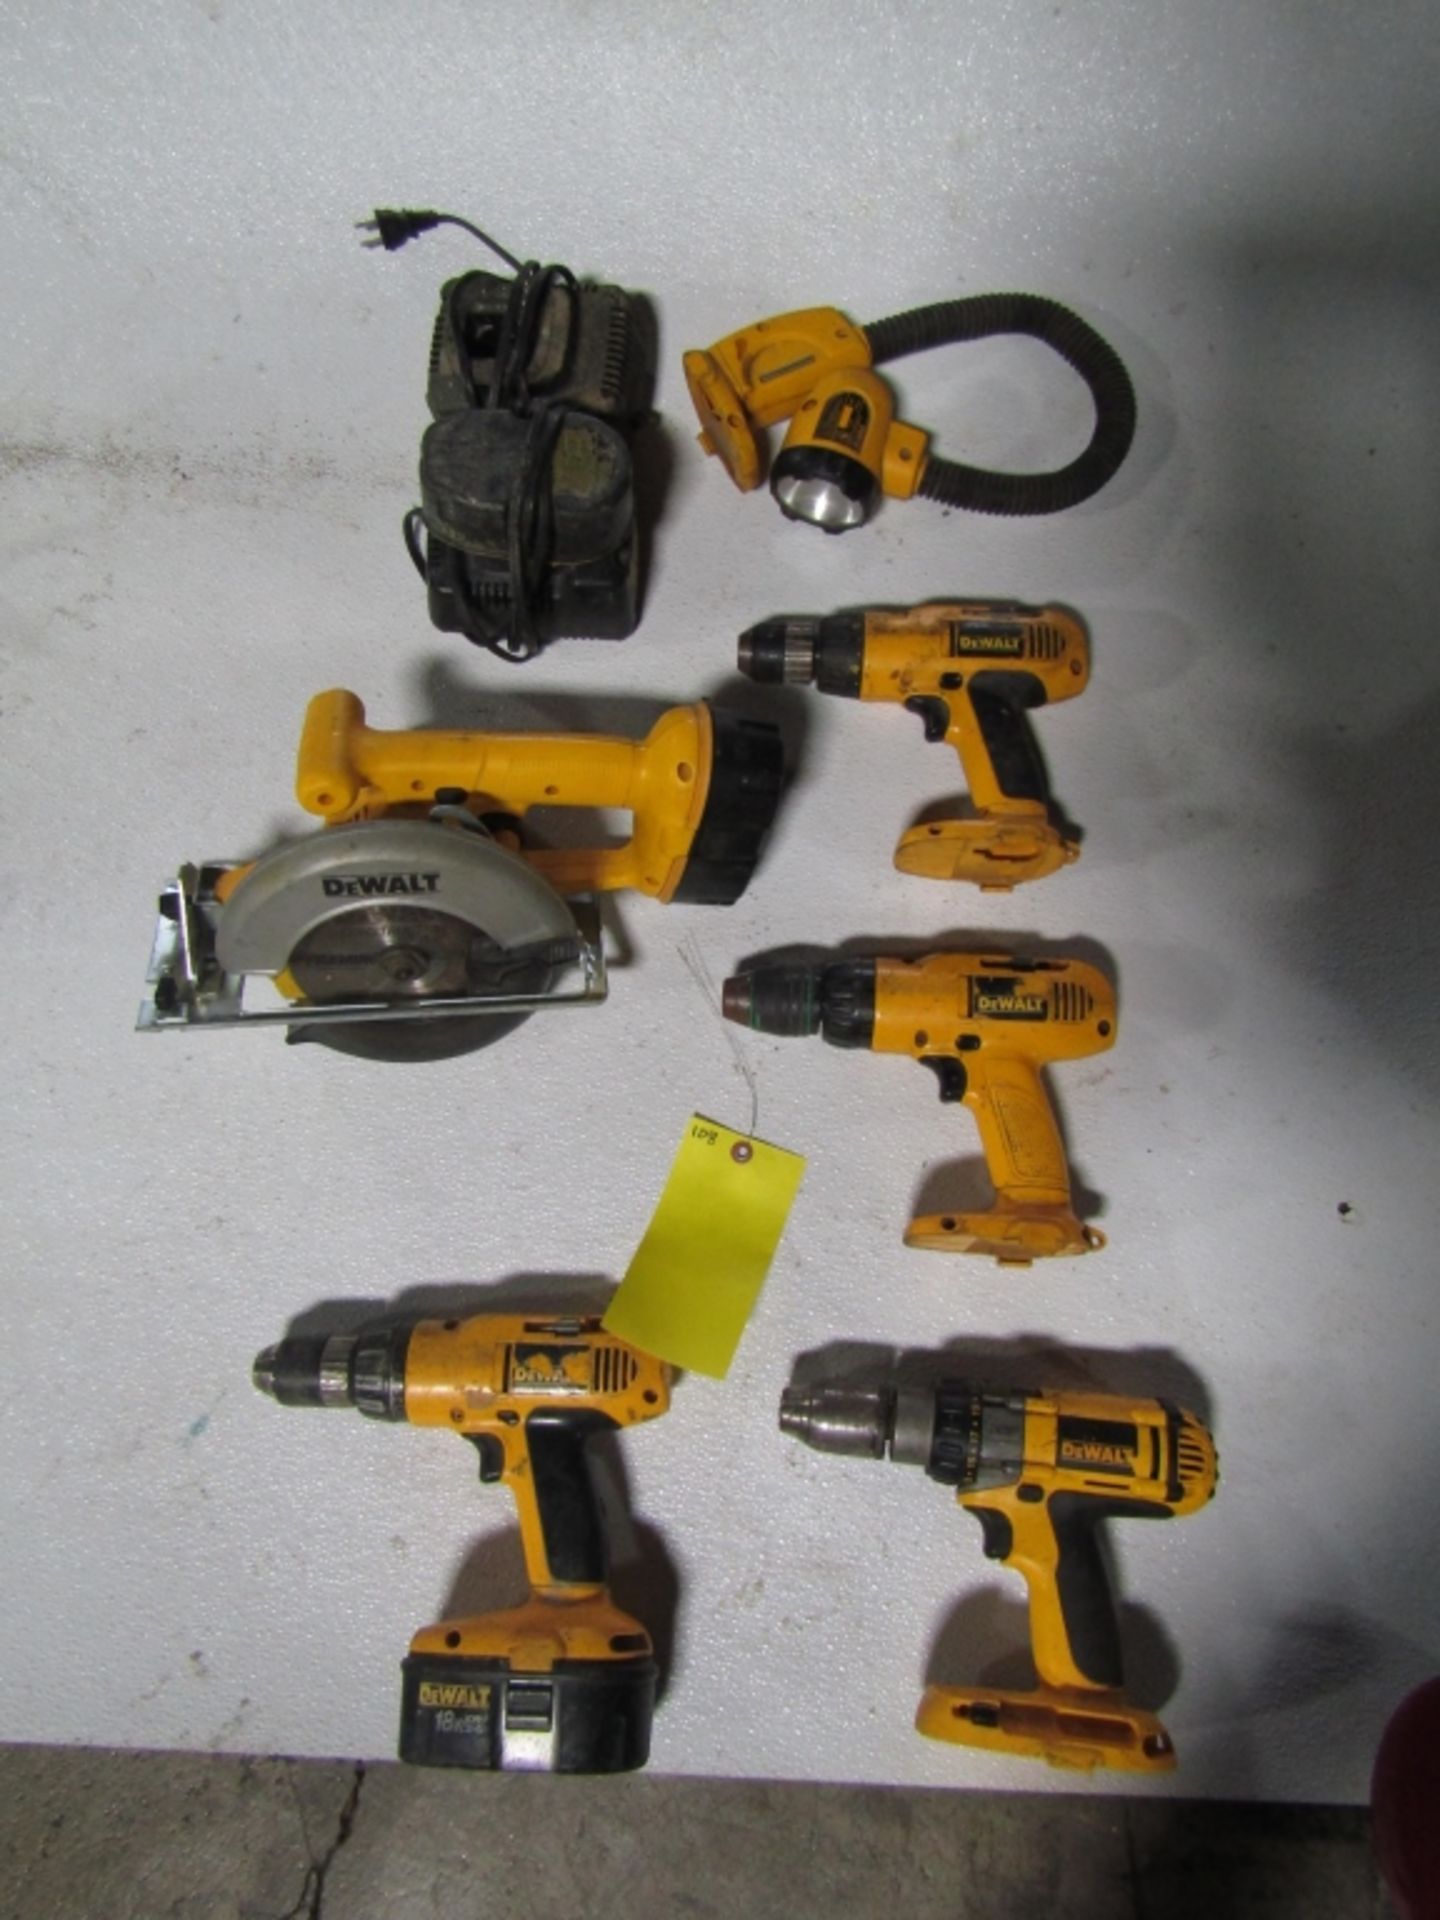 Set of Dewalt Electric Tools, (4)Drills, (1) Circular Saw, (2) Chargers & (1) Lantern, Located in